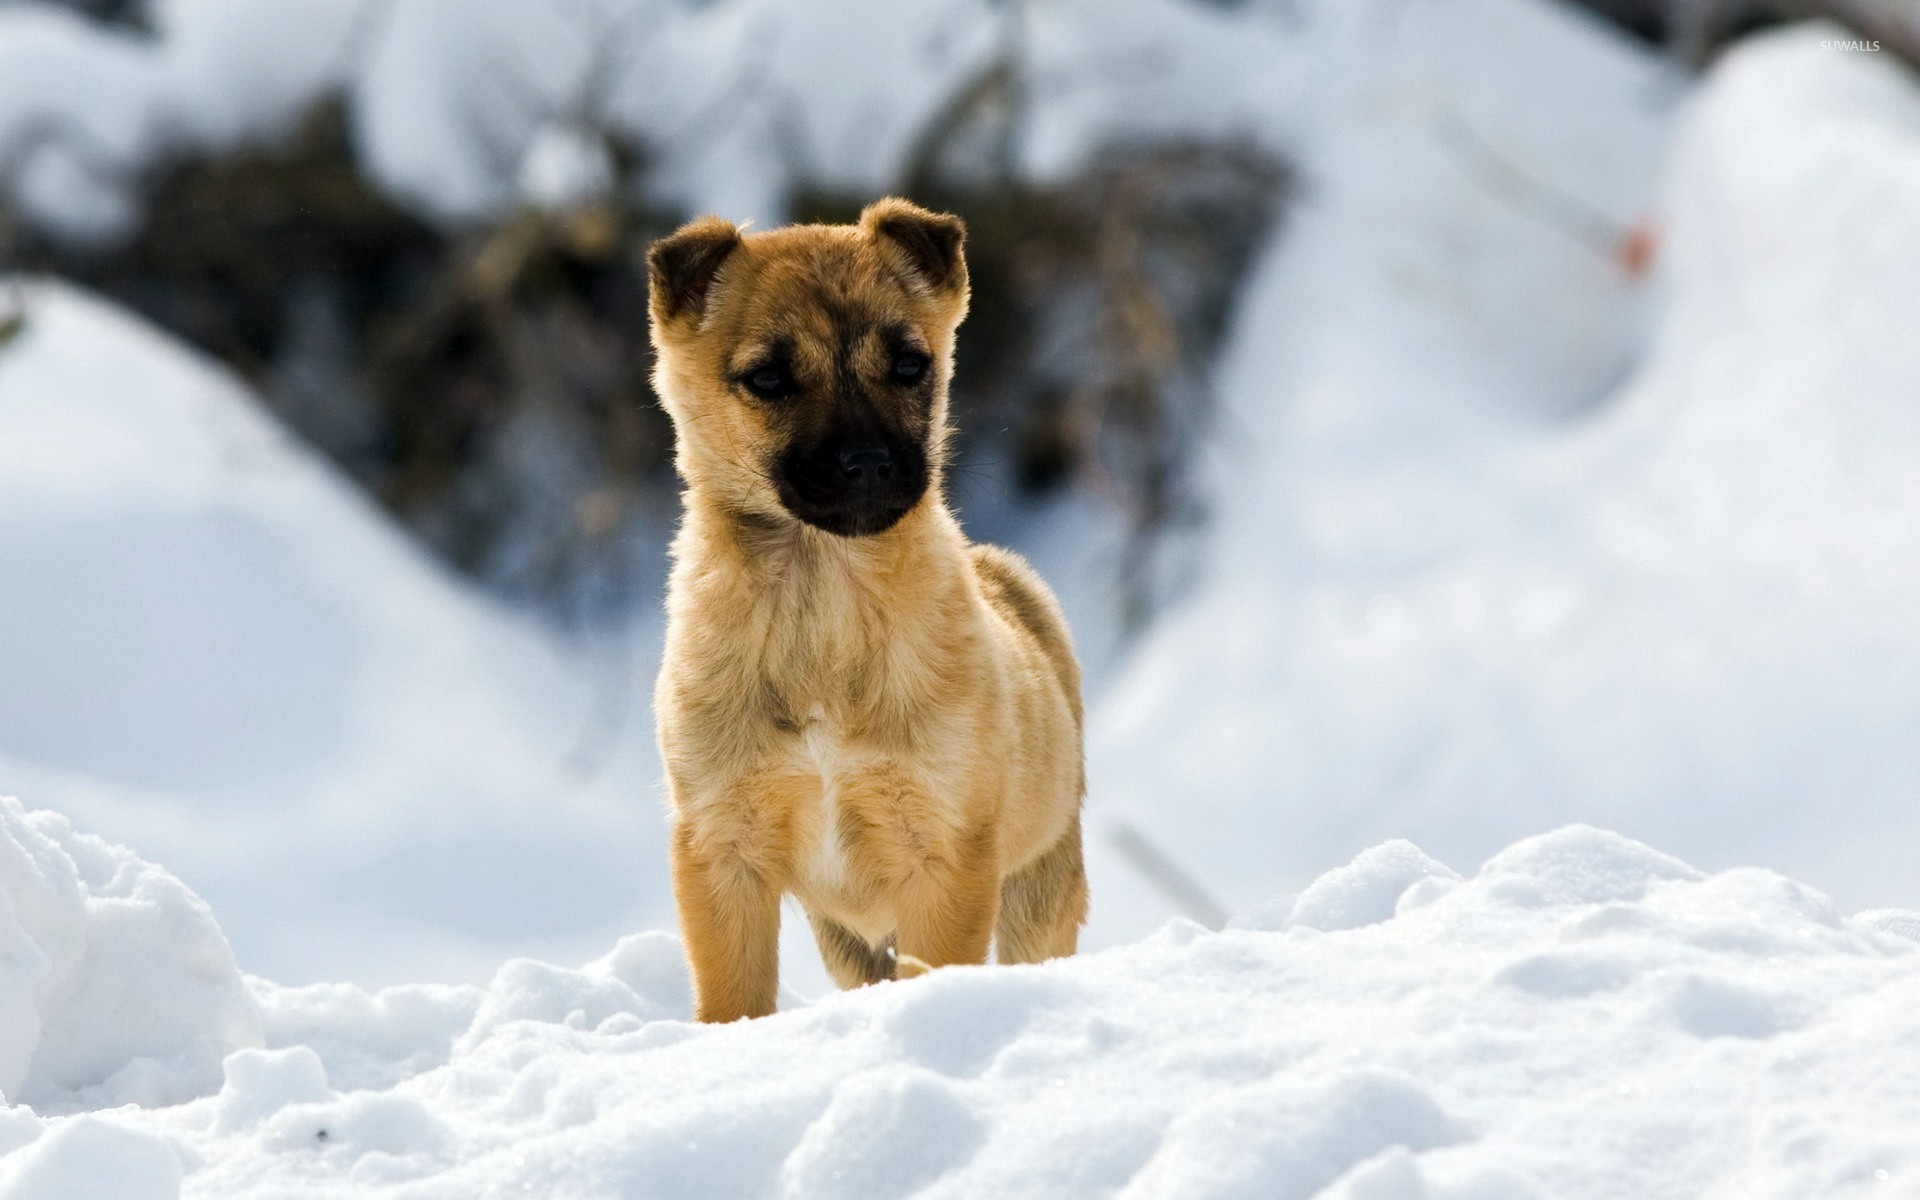 Puppy In The Snow Wallpaper Animal